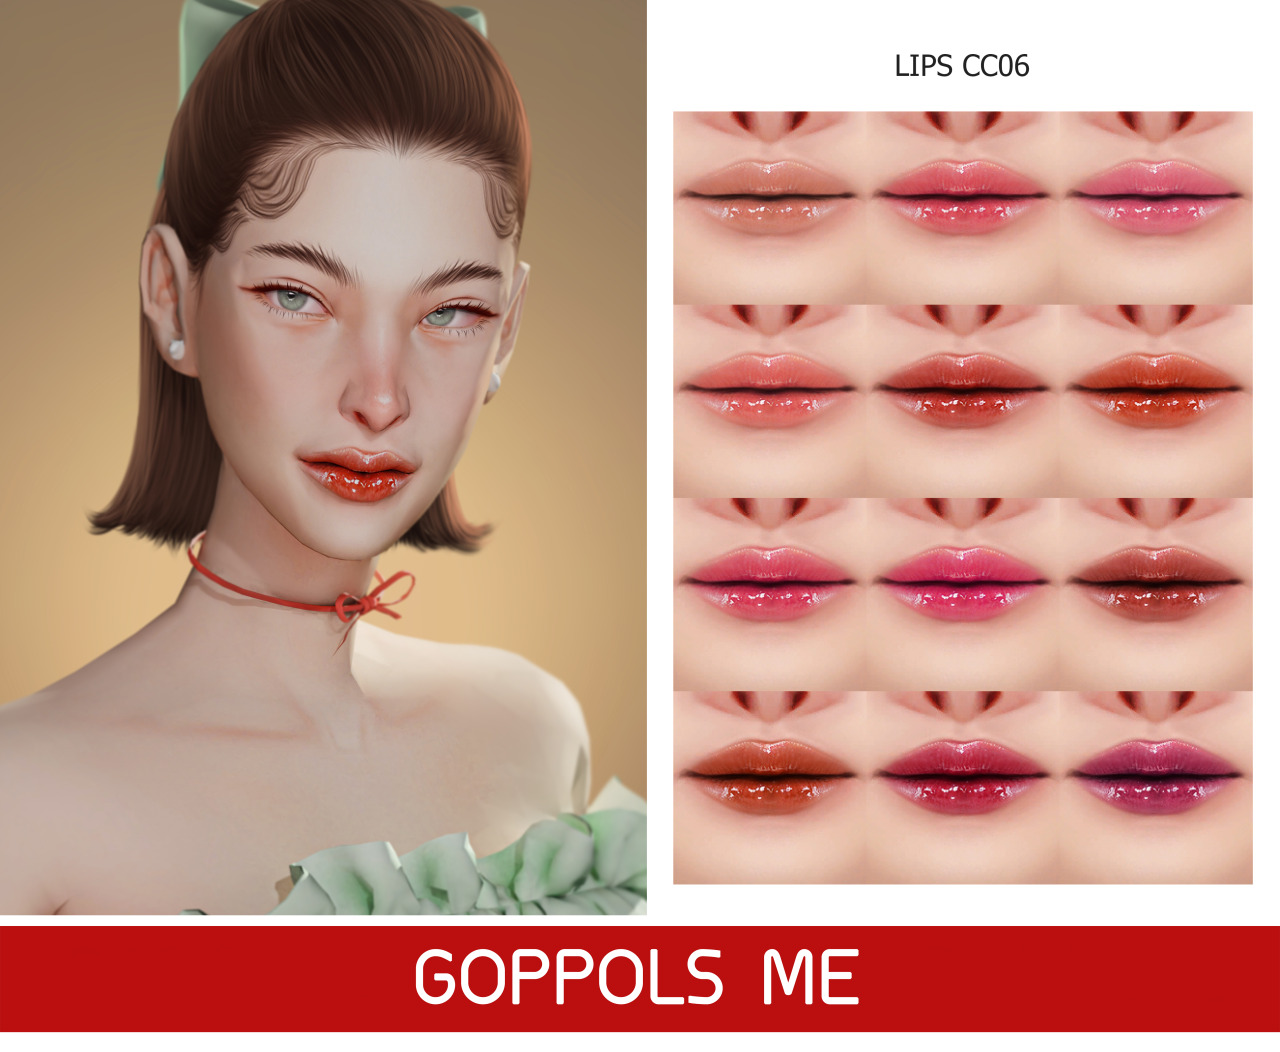 GPME-GOLD Lips CC06DownloadHQ mod compatibleAccess to Exclusive GOPPOLSME Patreon onlyThank for support me  ❤  Thanks for all CC creators ❤Hope you like it .Please don’t re-upload #goppolsme#thesims4#sims4cc#sims4ccfinds#sims4lips#s4cc#s4ccfinds#s4lipstick#s4lip